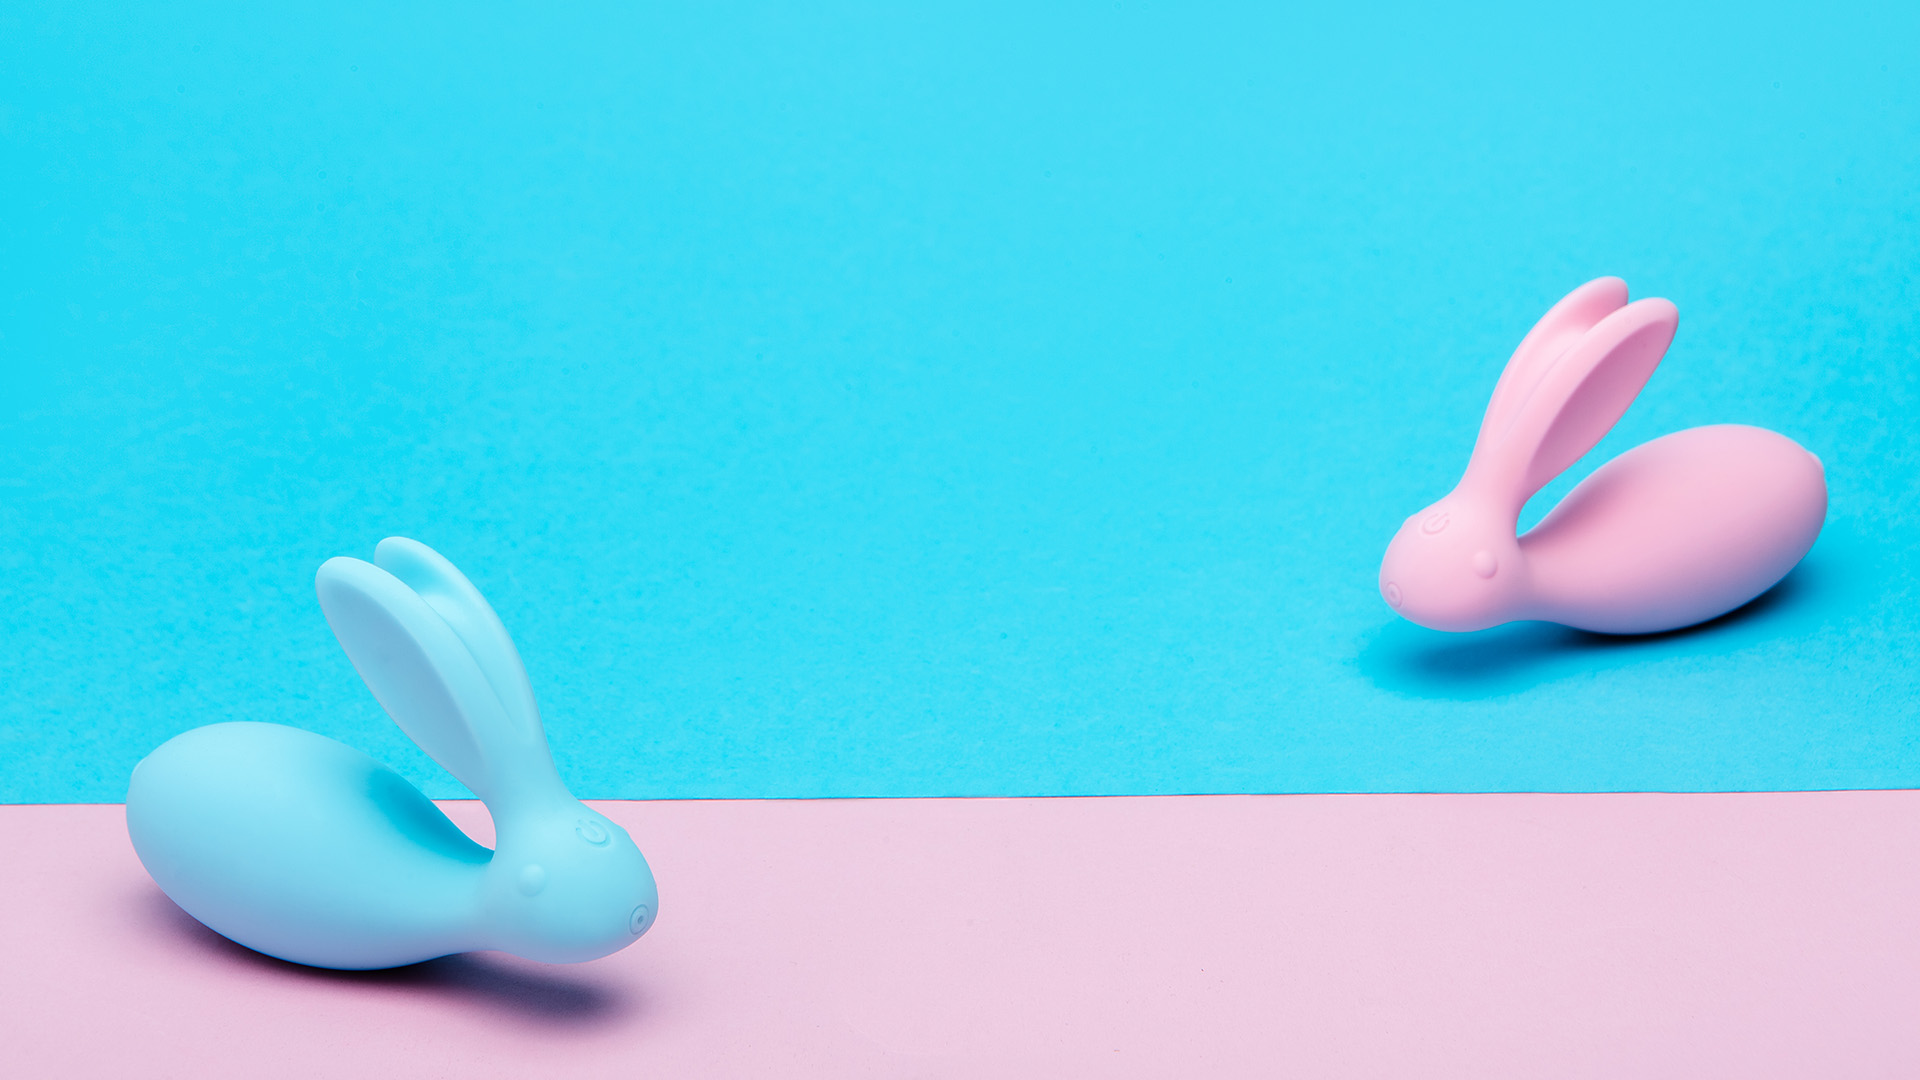 Baby blue and pink colored rabbit shaped vibrators facing each other on baby blue and pink background.